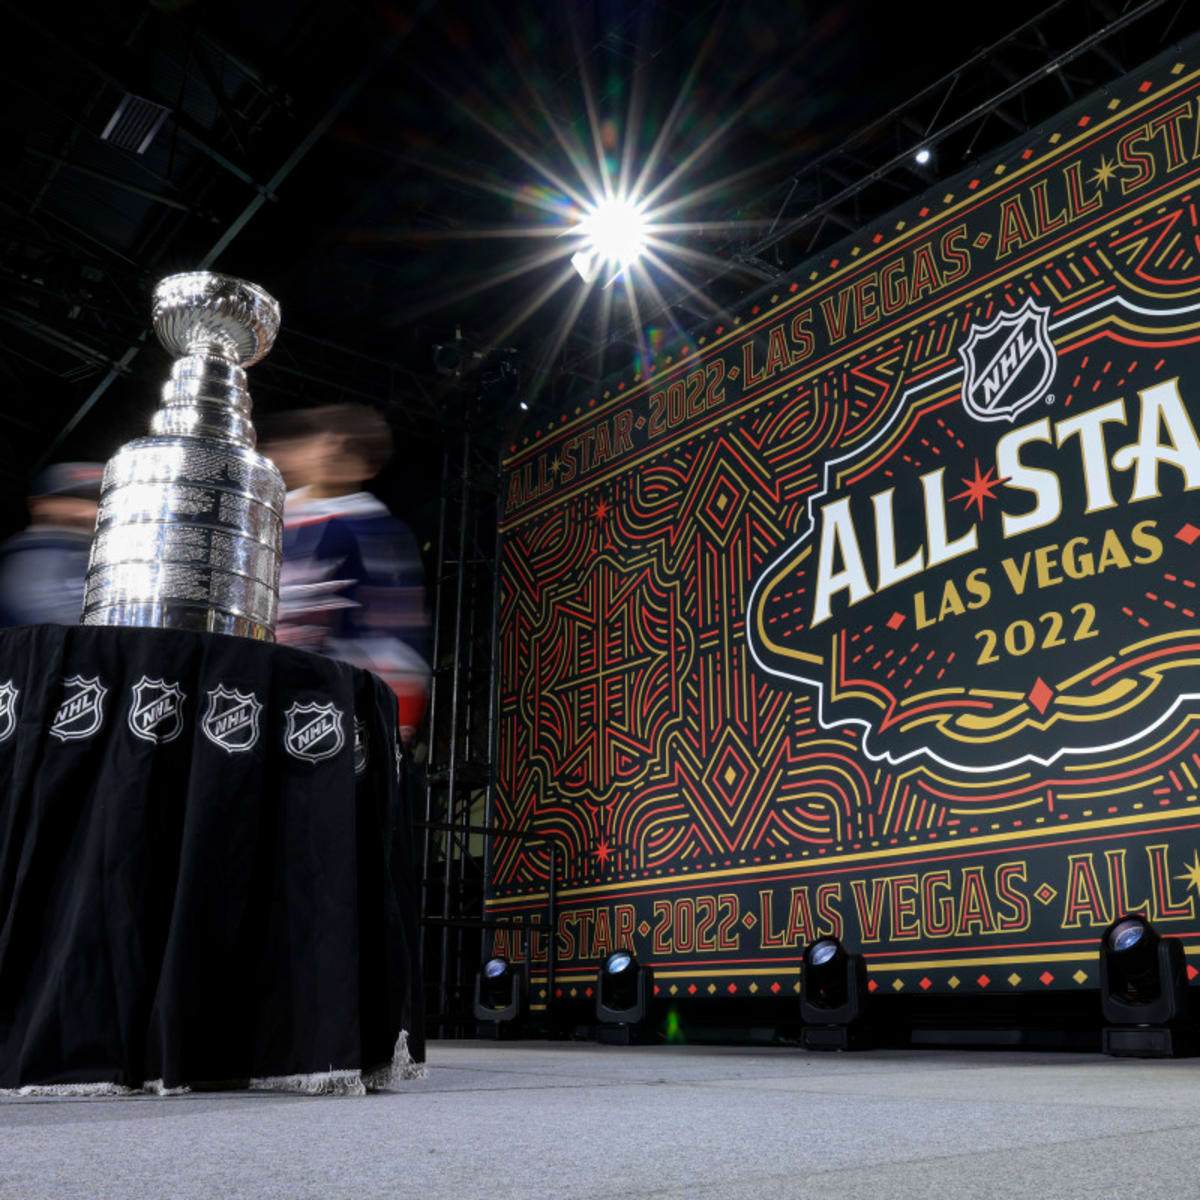 2022 NHL All-Star Skills Competition Live Stream Watch Online, TV Channel, Start Time - How to Watch and Stream Major League and College Sports